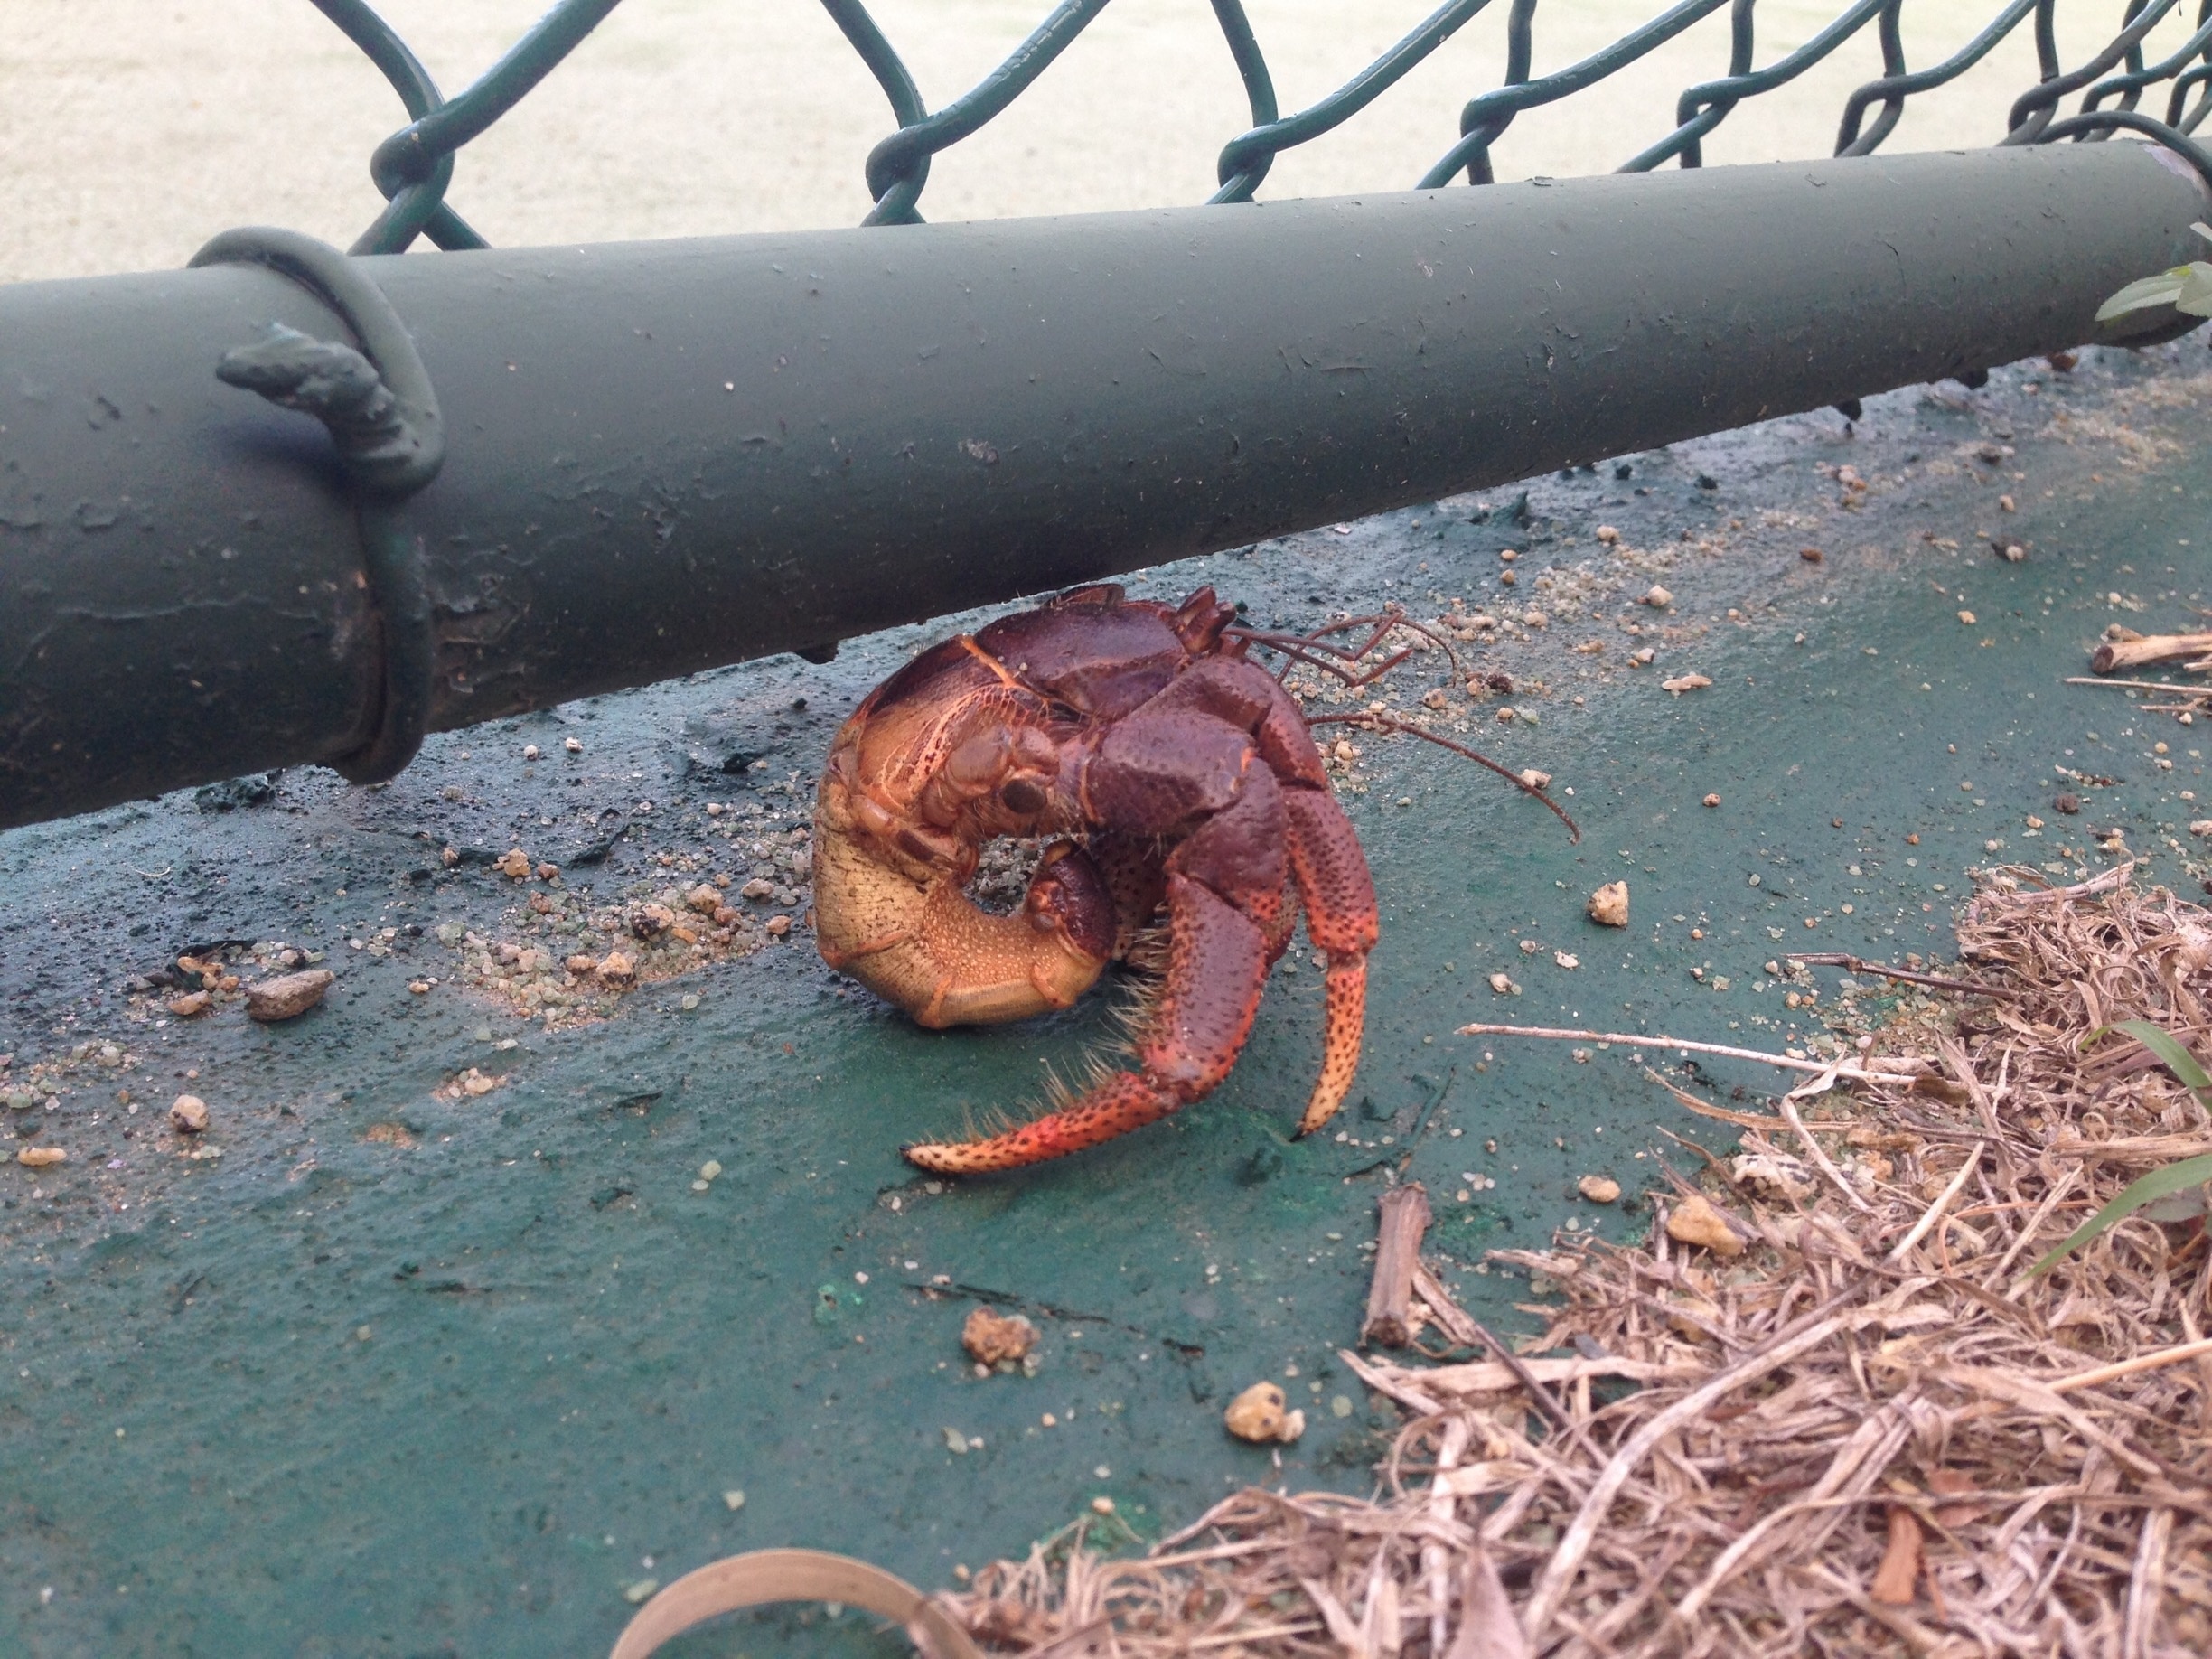 So this is what a land/hermit crab looks like without its shell! 